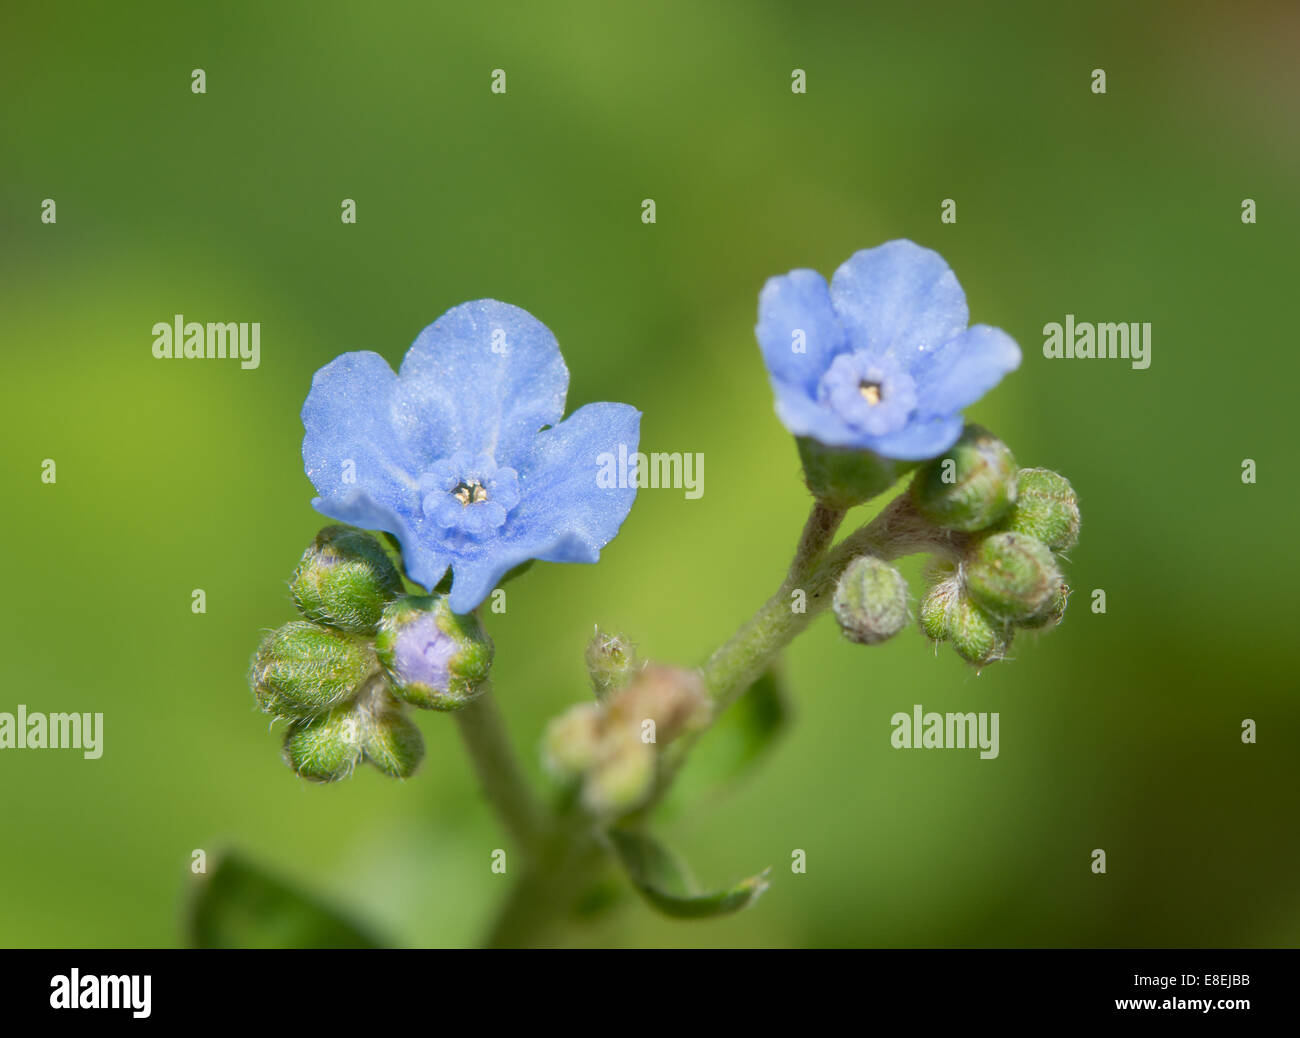 Tiny, delicate flowers of Cynoglossum amabile, Chinese Forget-me-not Stock Photo